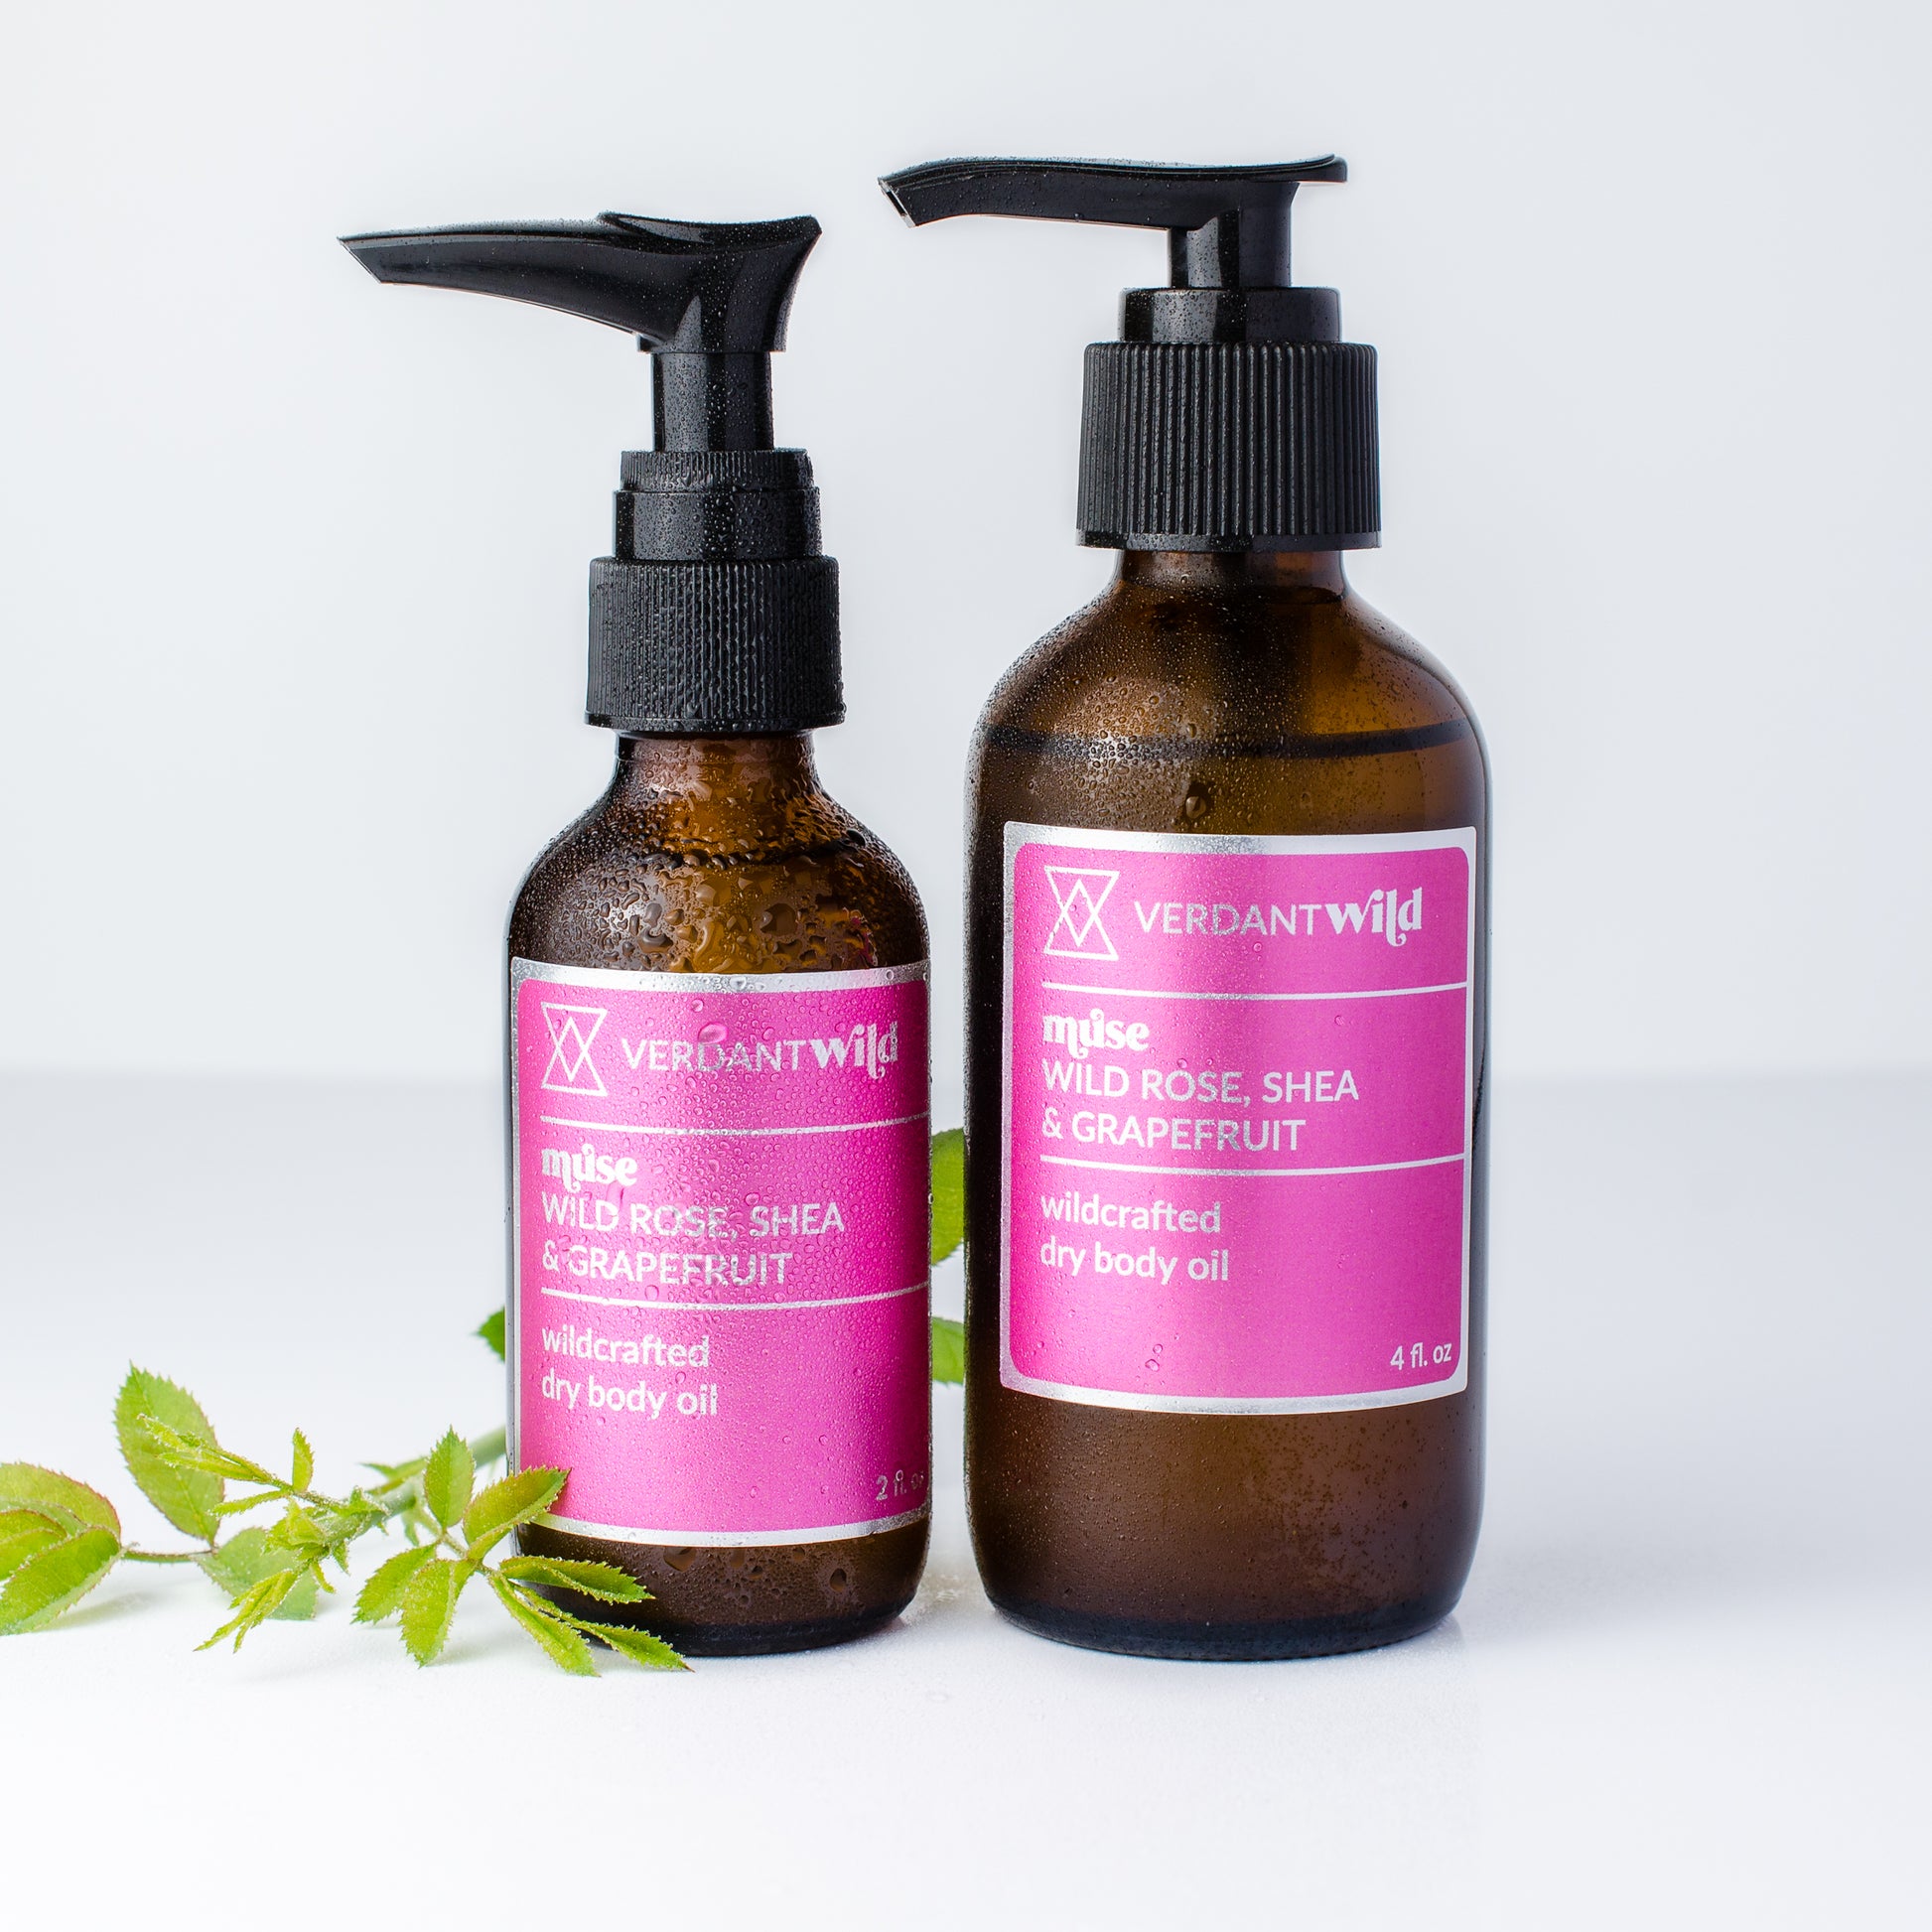 wild rose dry body oil with shea and rose leaf prop, misted with water cooling effect